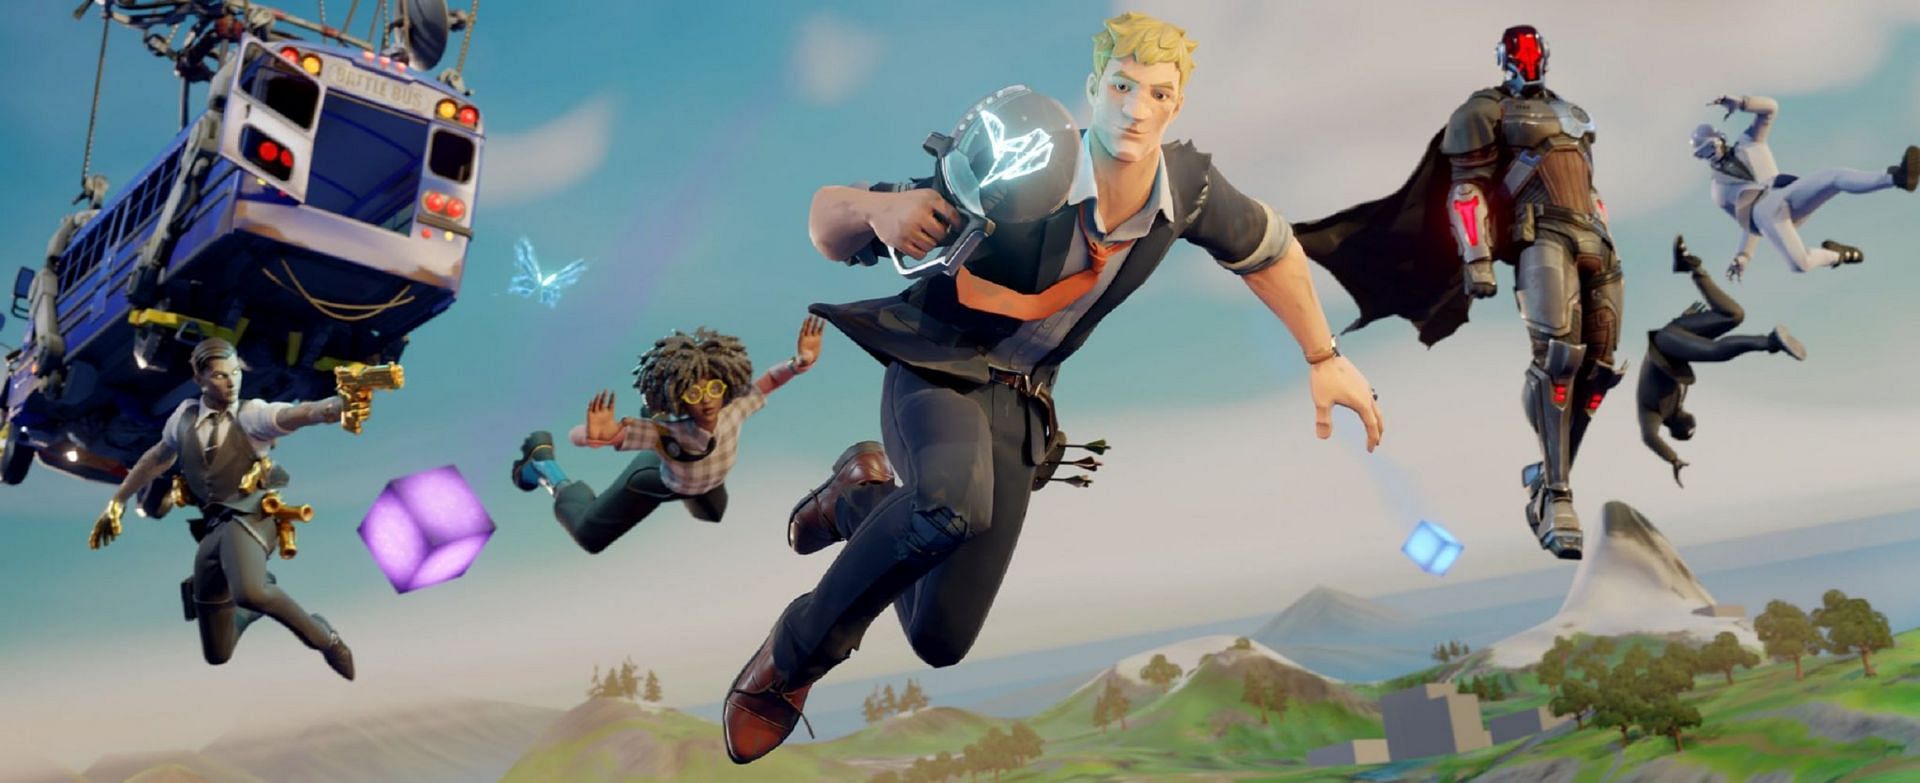 Fortnite 18.40 update PATCH NOTES, Naruto skins, Cube Pyramid, Brute mechs,  fund battle, Gaming, Entertainment